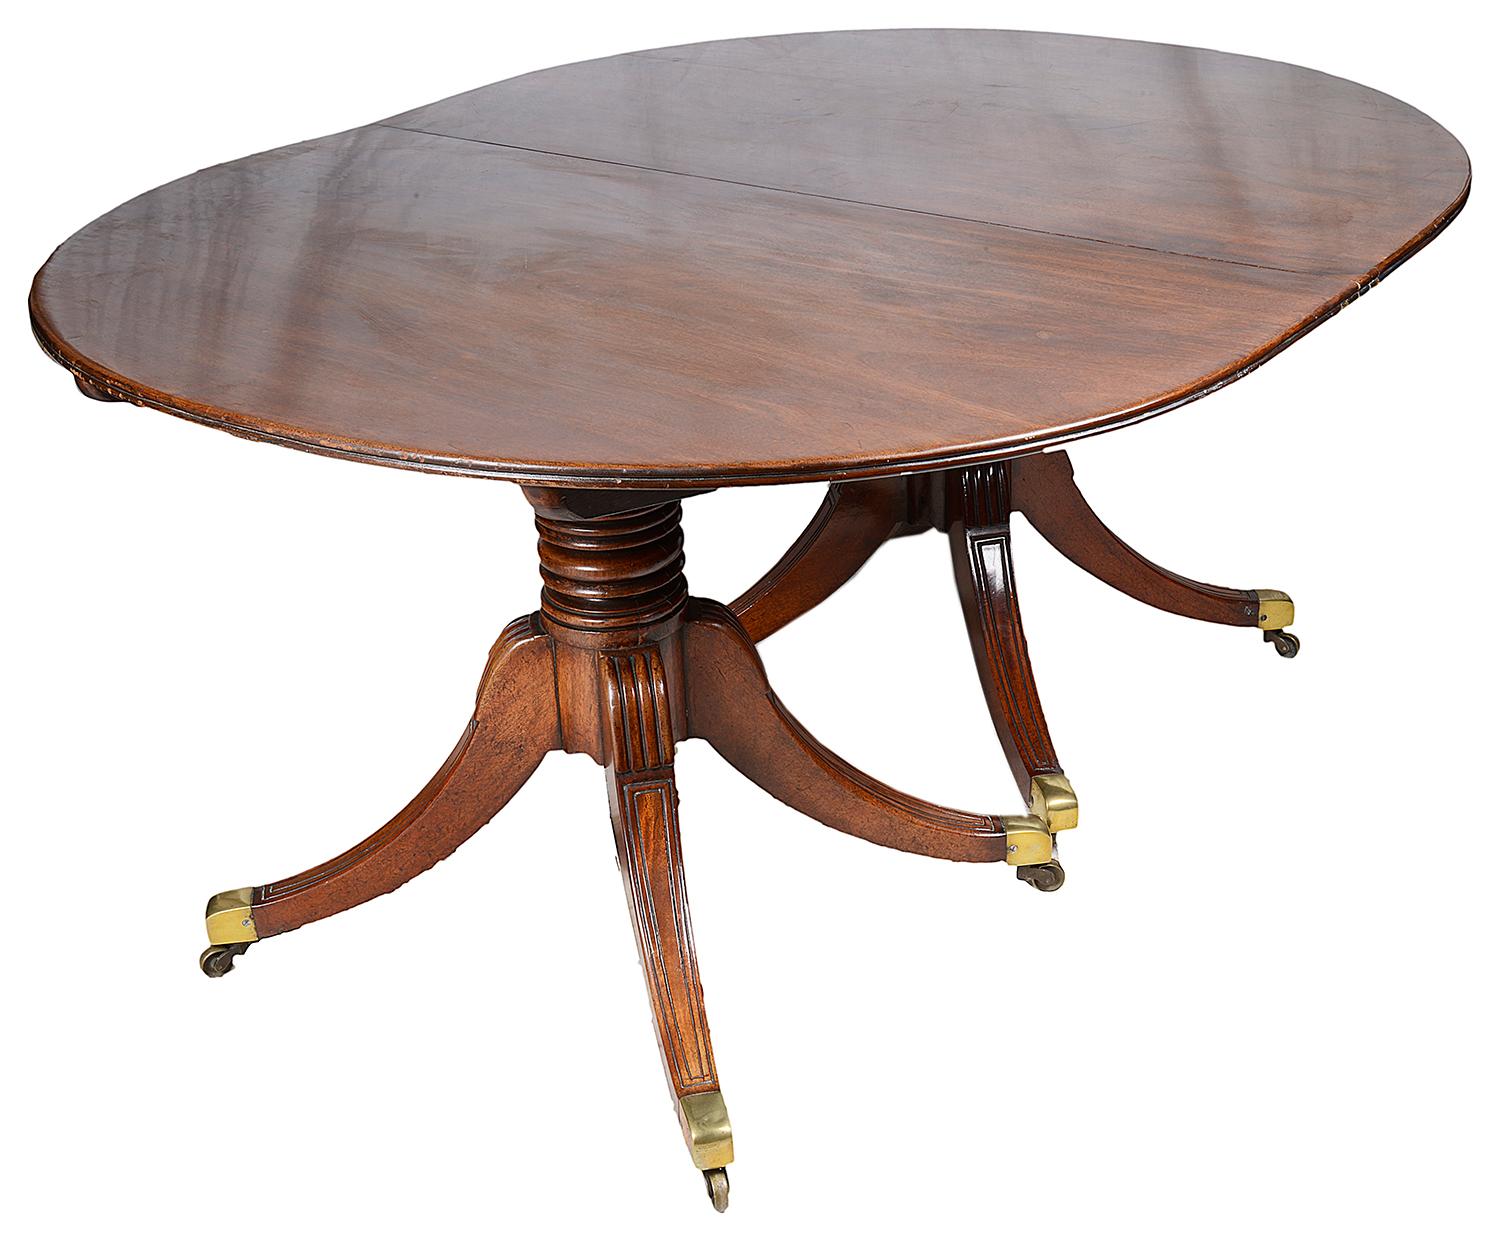 A good quality Regency period mahogany twin pedestal dining table, having two extra leaves allowing a selection of sizes to seat from 4 to 10 people. The bases being reeded four splays terminating in the original brass castors.
Each leaf measures